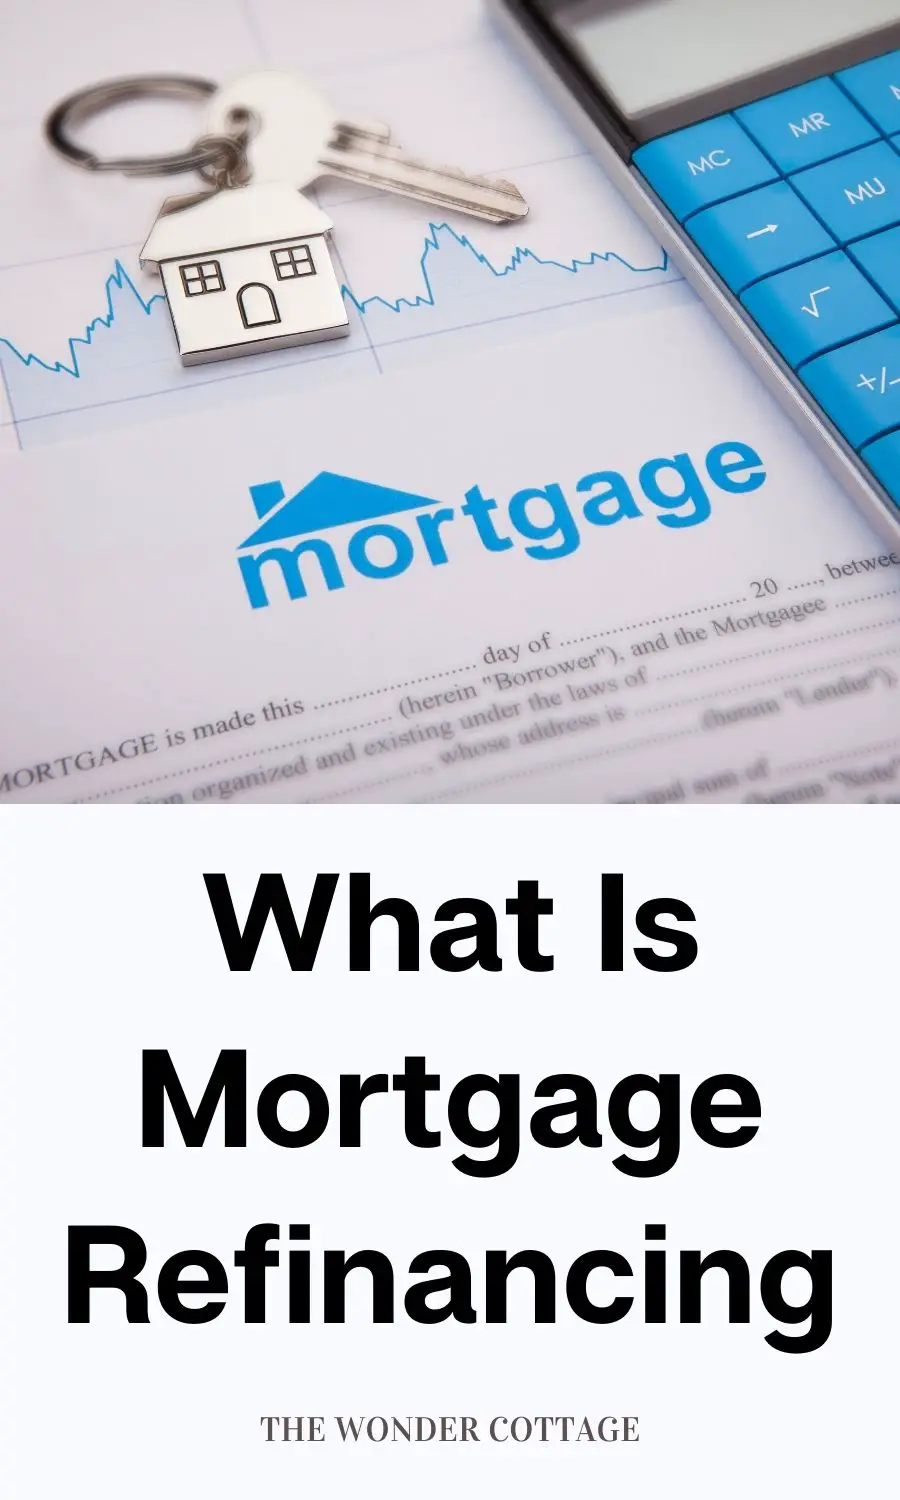 what is mortgage refinancing?